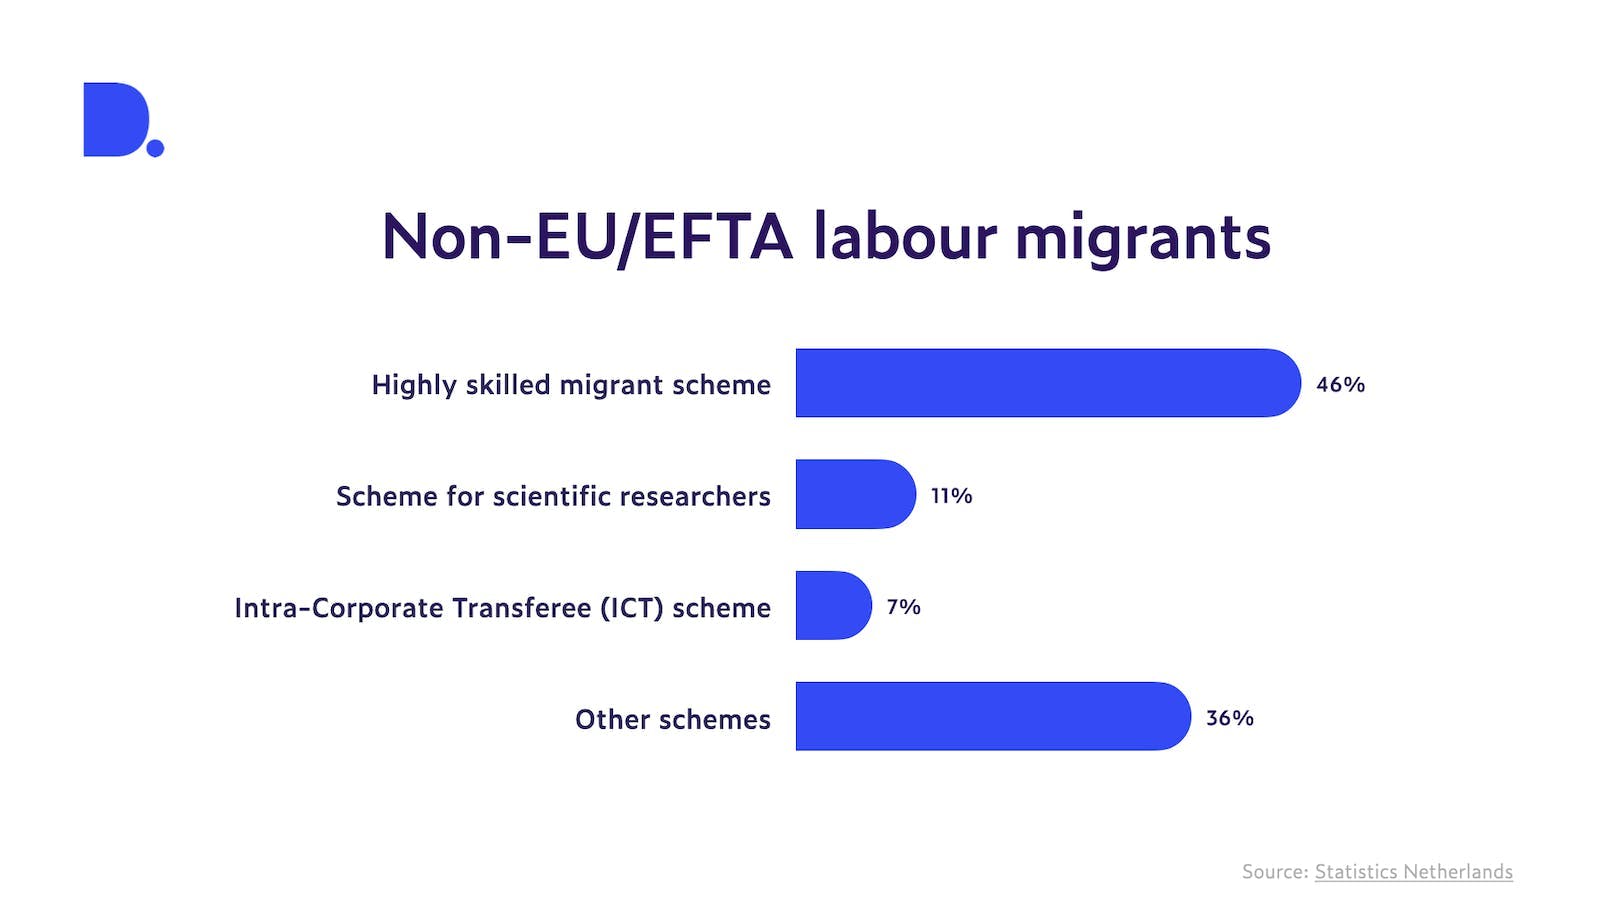  Bar chart showing the percentage for scheme types currently used by non-EU/EFTA labor migrants according to the Dutch Statistics Agency (CBS). The percentages are: Highly skilled migrant scheme (46%), Scheme for scientific researchers (11%), Intra-Corporate Transferee (ICT) scheme (7%) Other schemes (36%).